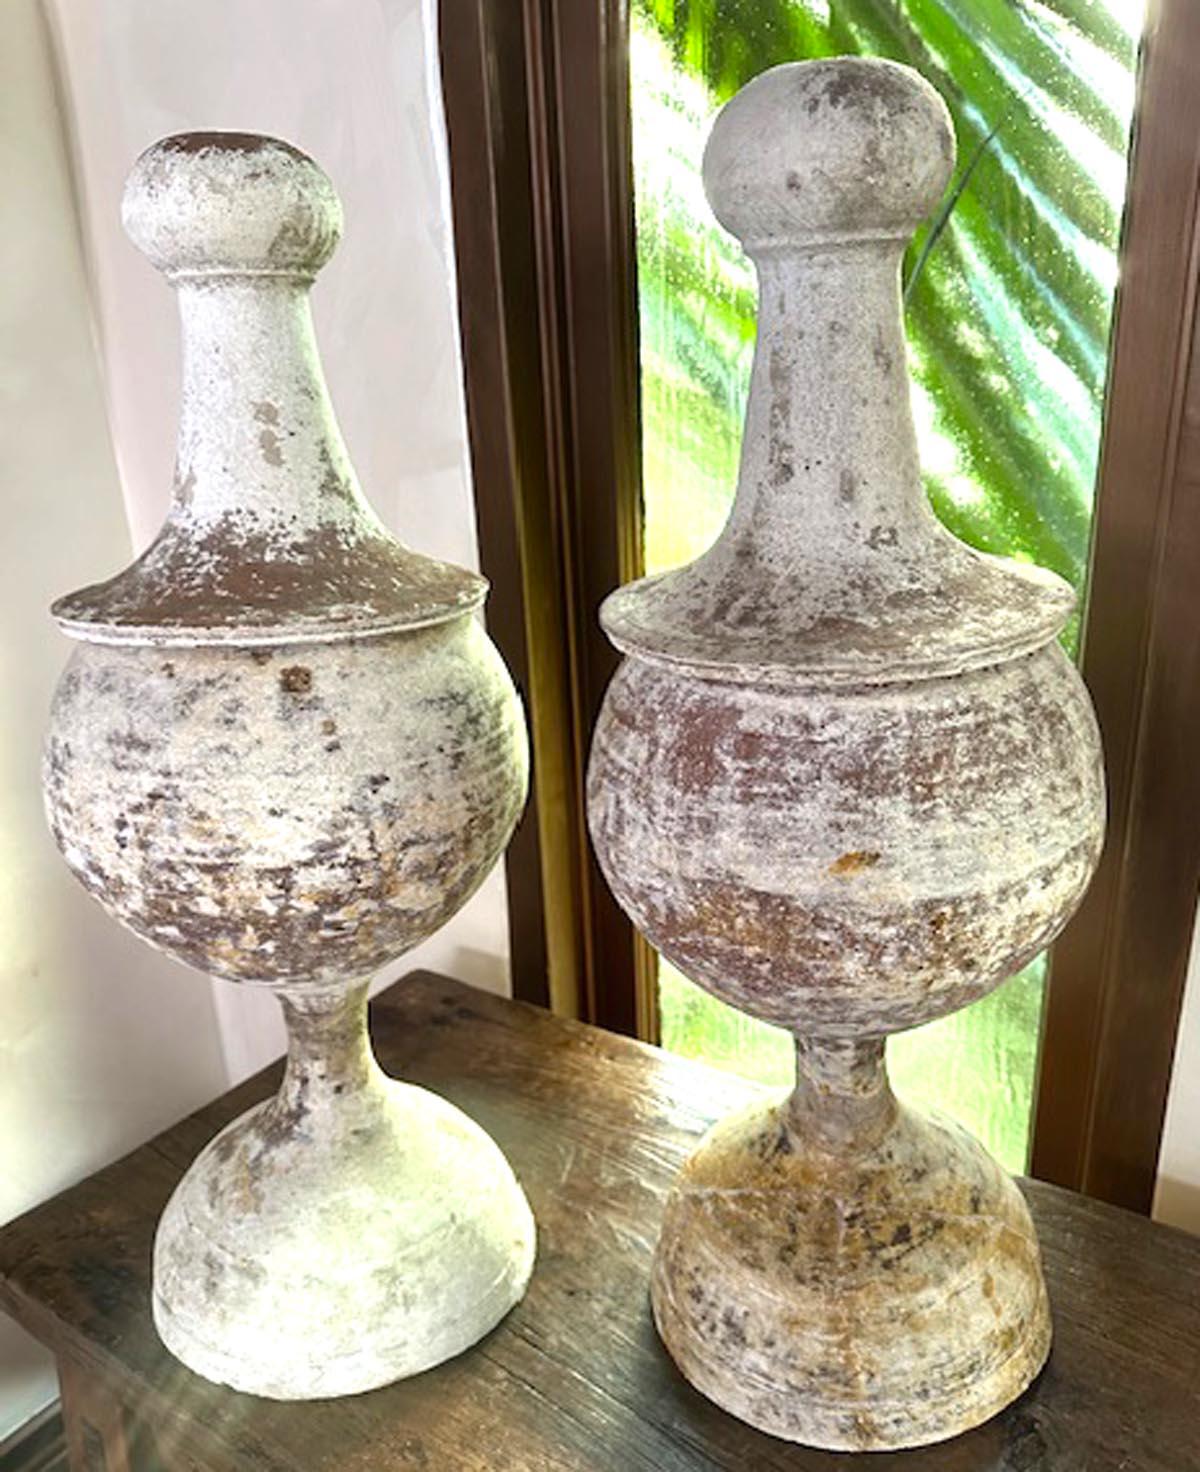 This listing is for two 19th century terra-cotta finials with old gesso.
These sat on pre 1825, Spanish Colonial houses. Top lifts off. From the high Highlands of Guatemala. Old natural patina.
